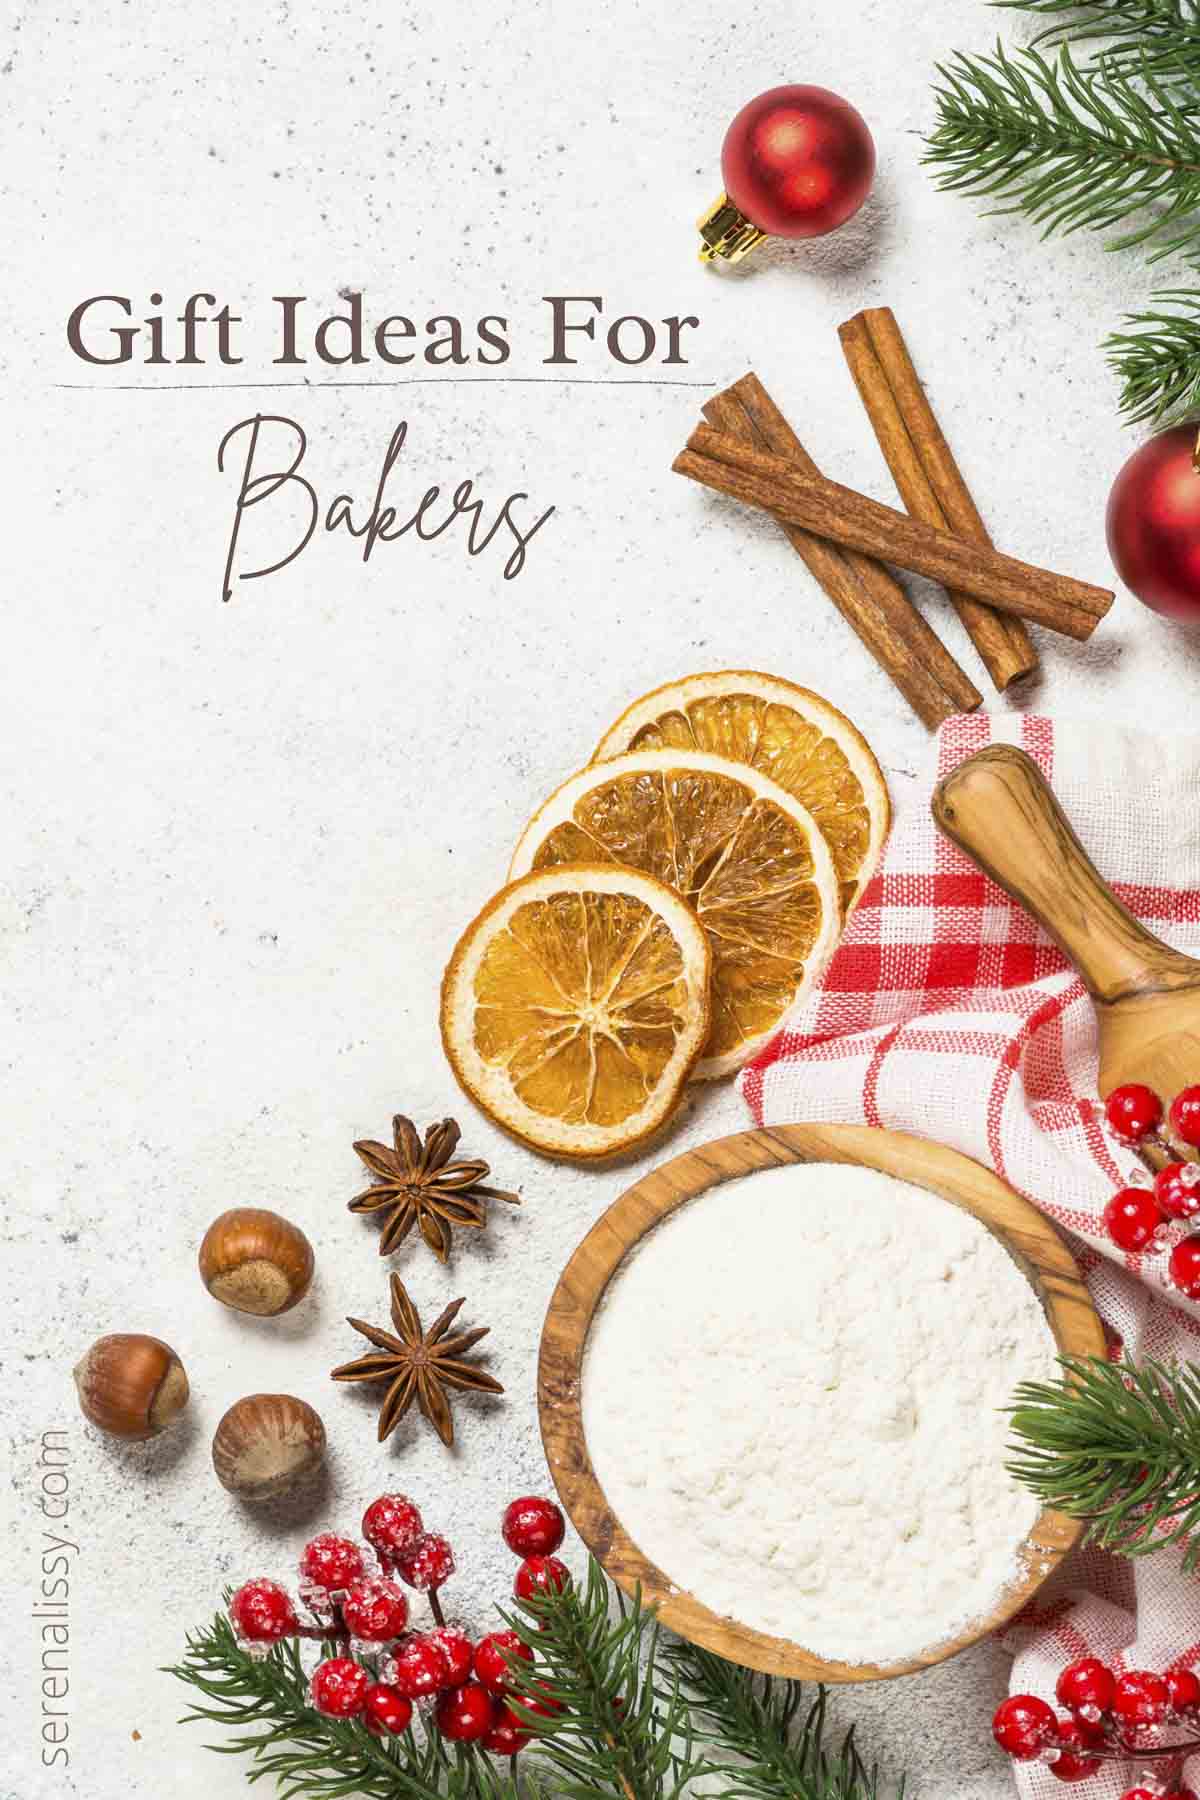 15 GIft Ideas For Bakers